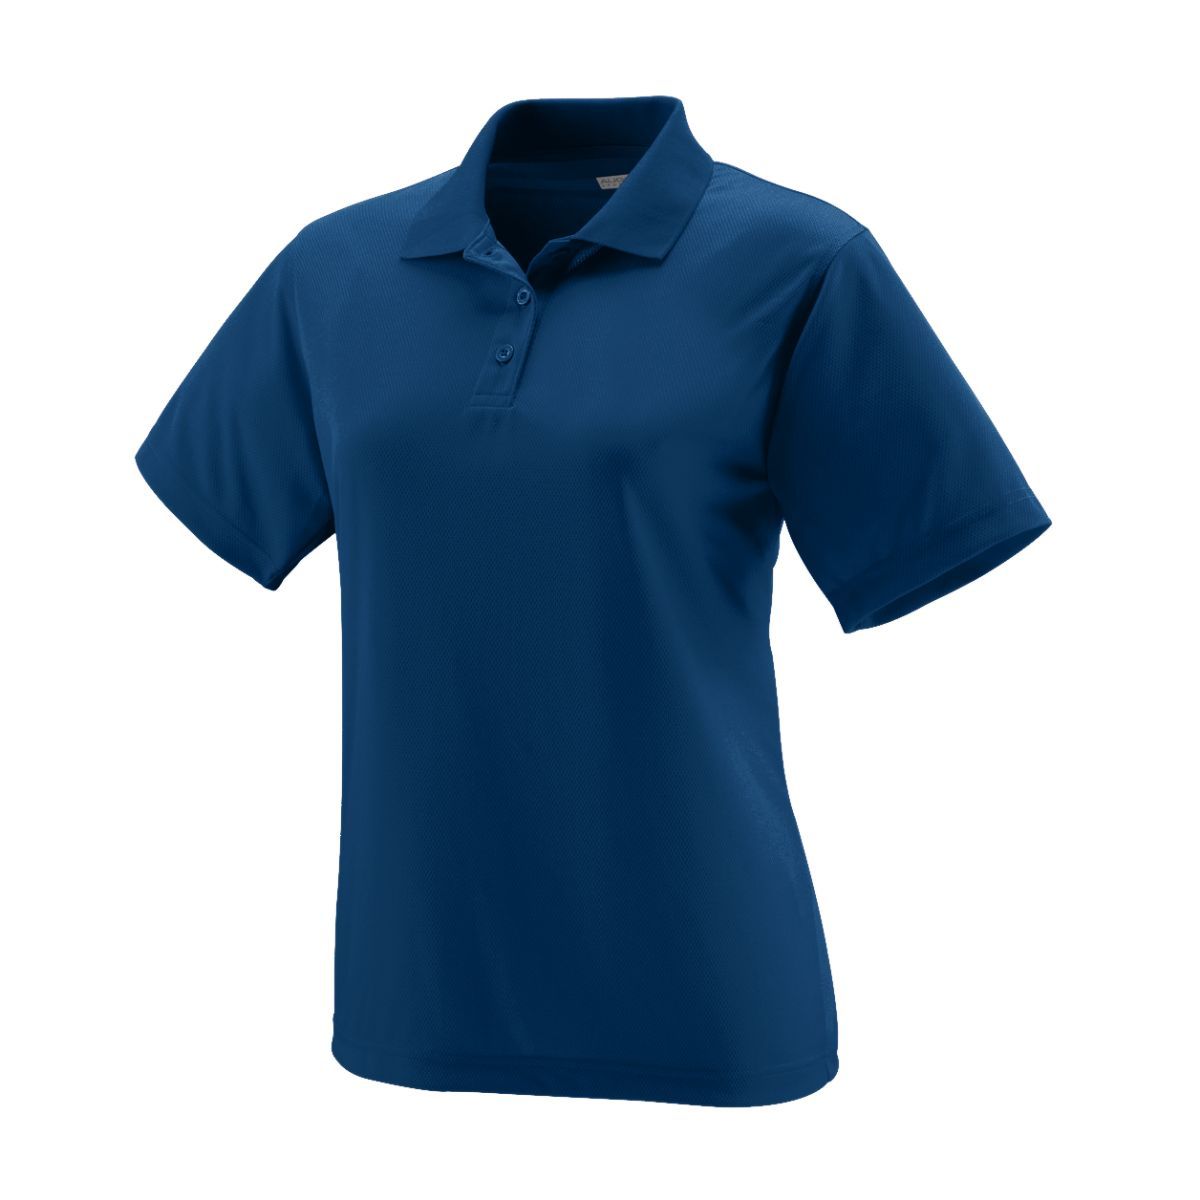 Augusta Sportswear Ladies Wicking Mesh Polo in Navy  -Part of the Ladies, Ladies-Polo, Polos, Augusta-Products, Tennis, Shirts product lines at KanaleyCreations.com